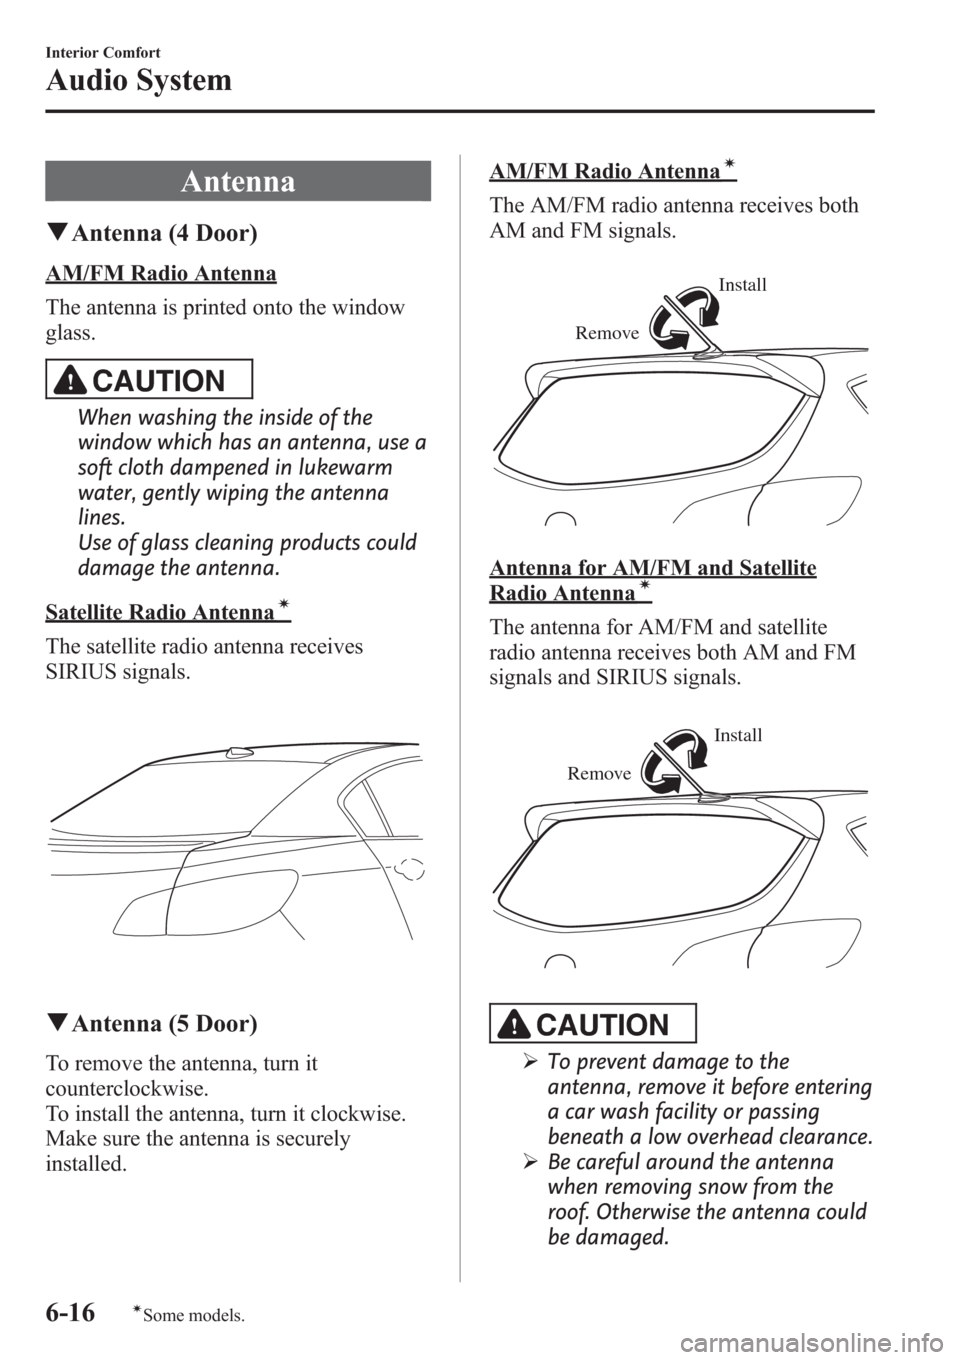 MAZDA MODEL 3 HATCHBACK 2013  Owners Manual (in English) Antenna
qAntenna (4 Door)
AM/FM Radio Antenna
The antenna is printed onto the window
glass.
CAUTION
When washing the inside of the
window which has an antenna, use a
soft cloth dampened in lukewarm
wa